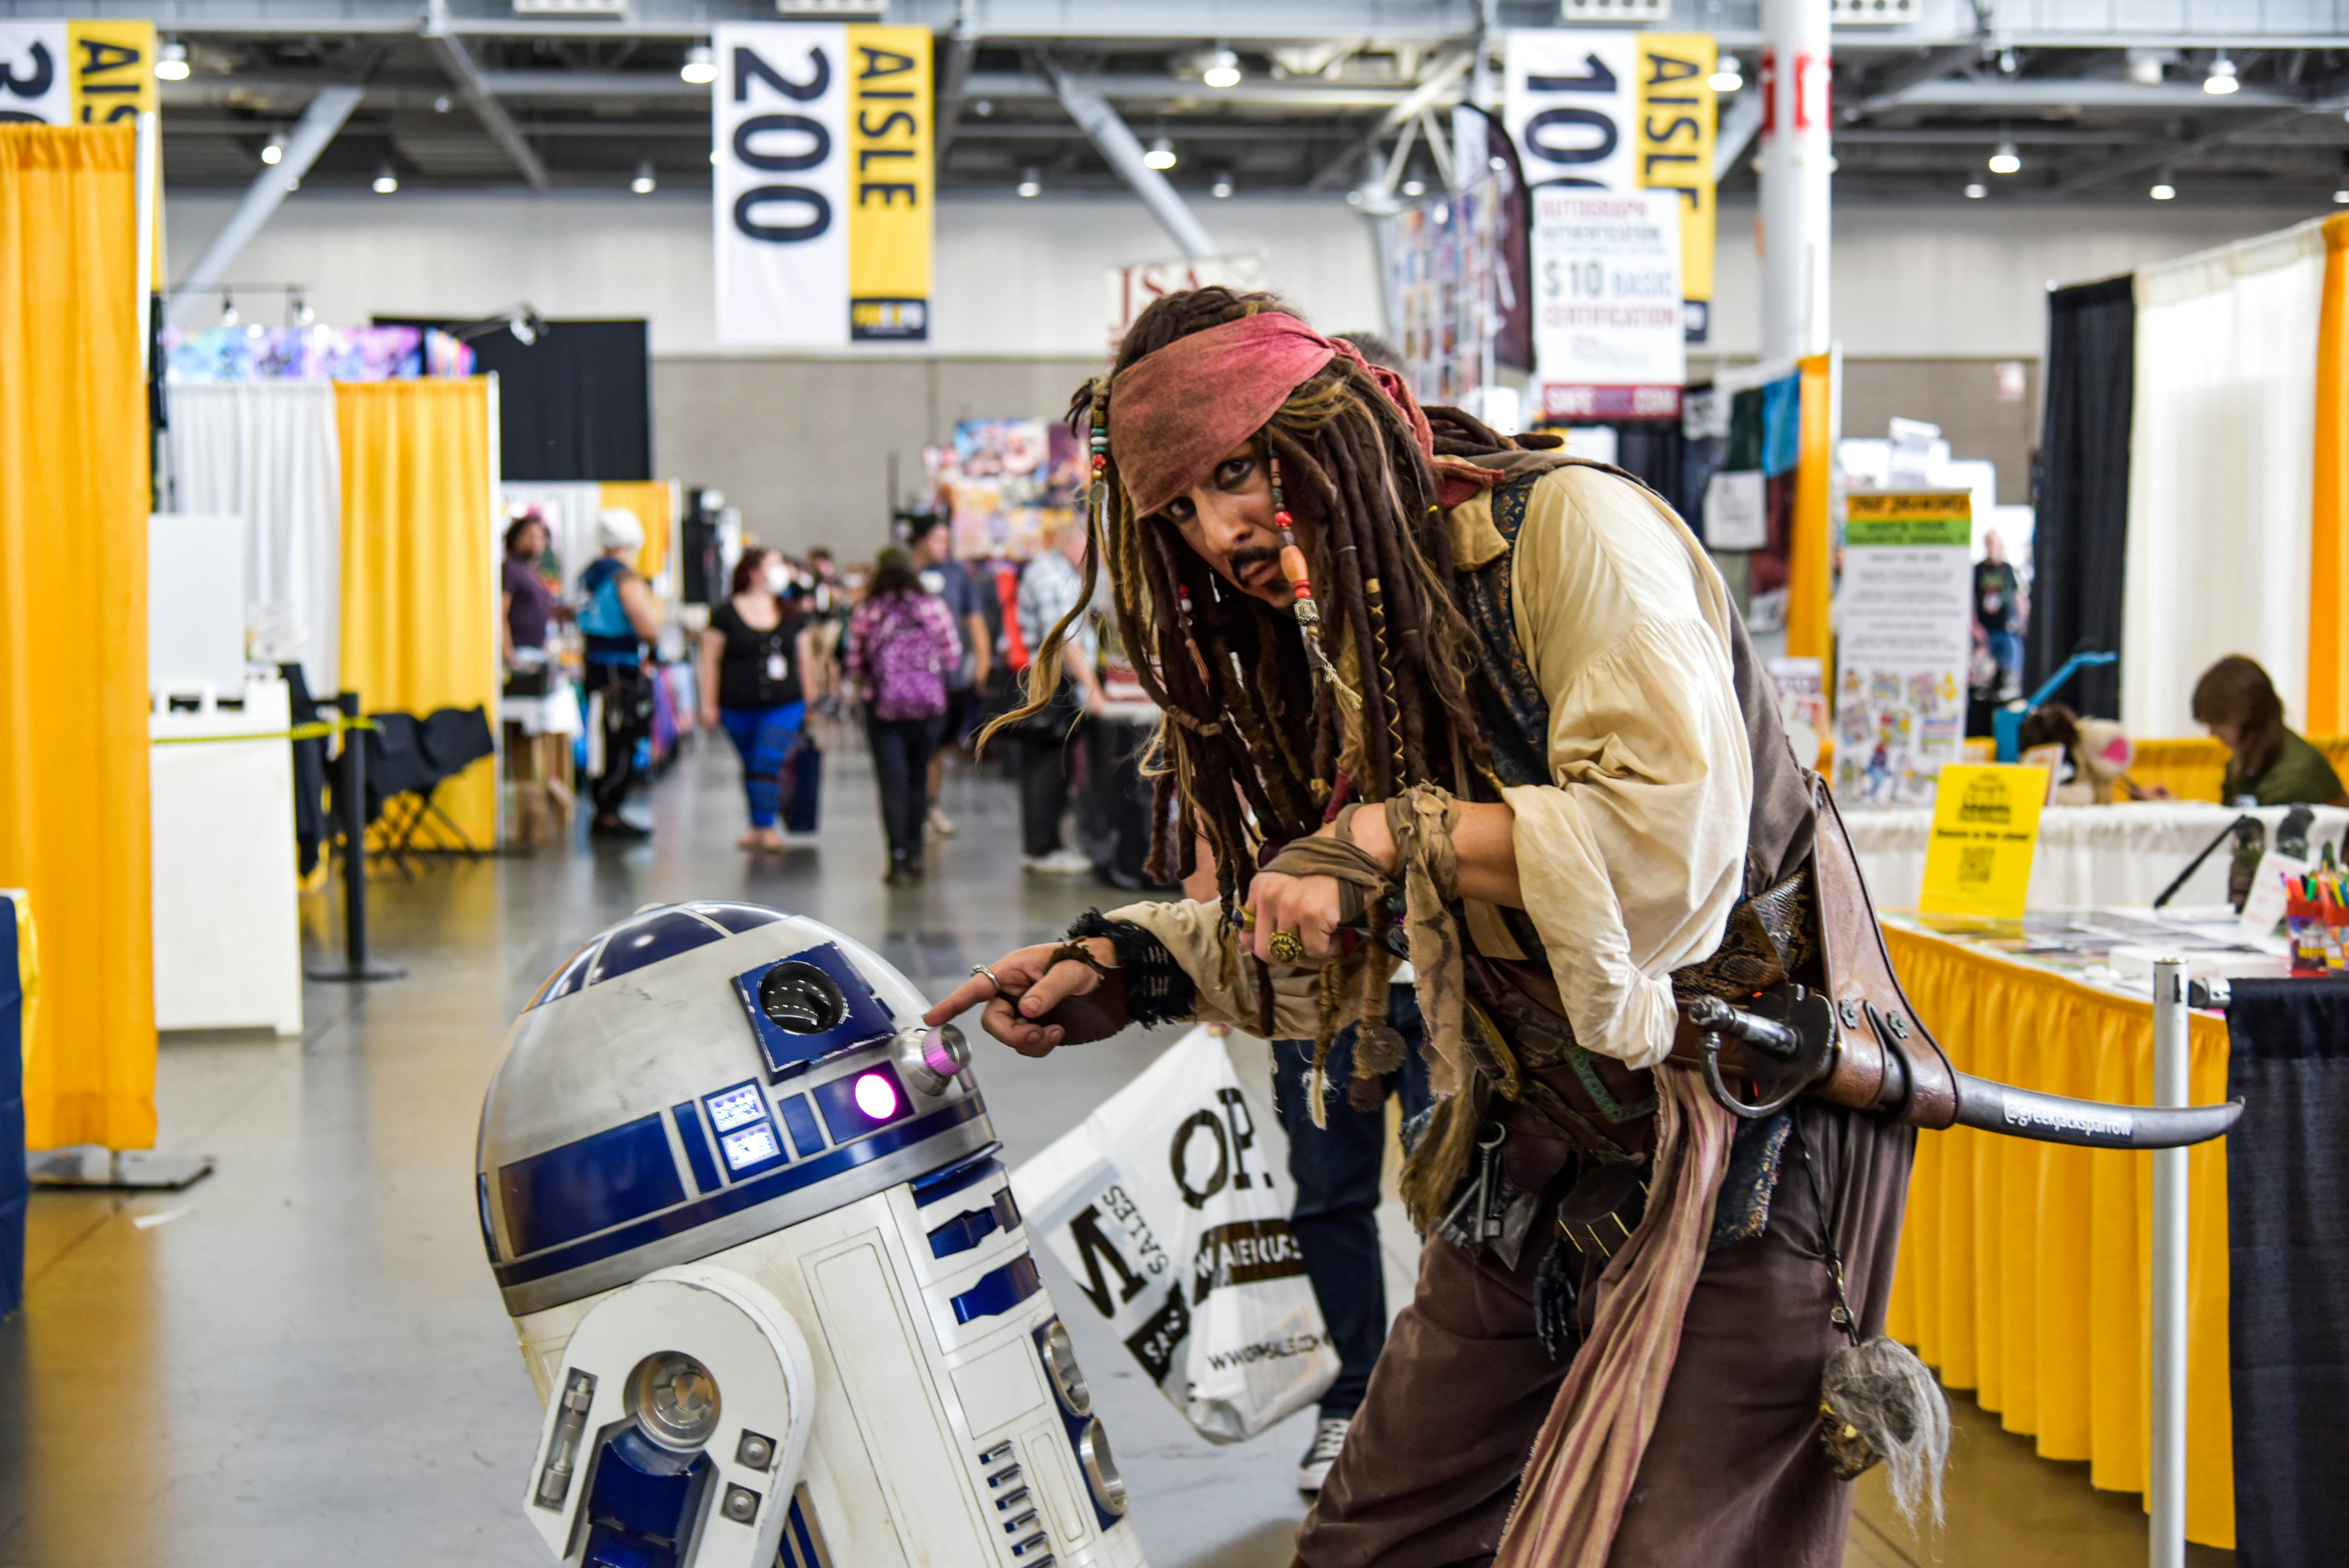 Captain Jack Sparrow from Disney's Pirate's of the Caribbean interacting with R2-D2 from Star Wars.